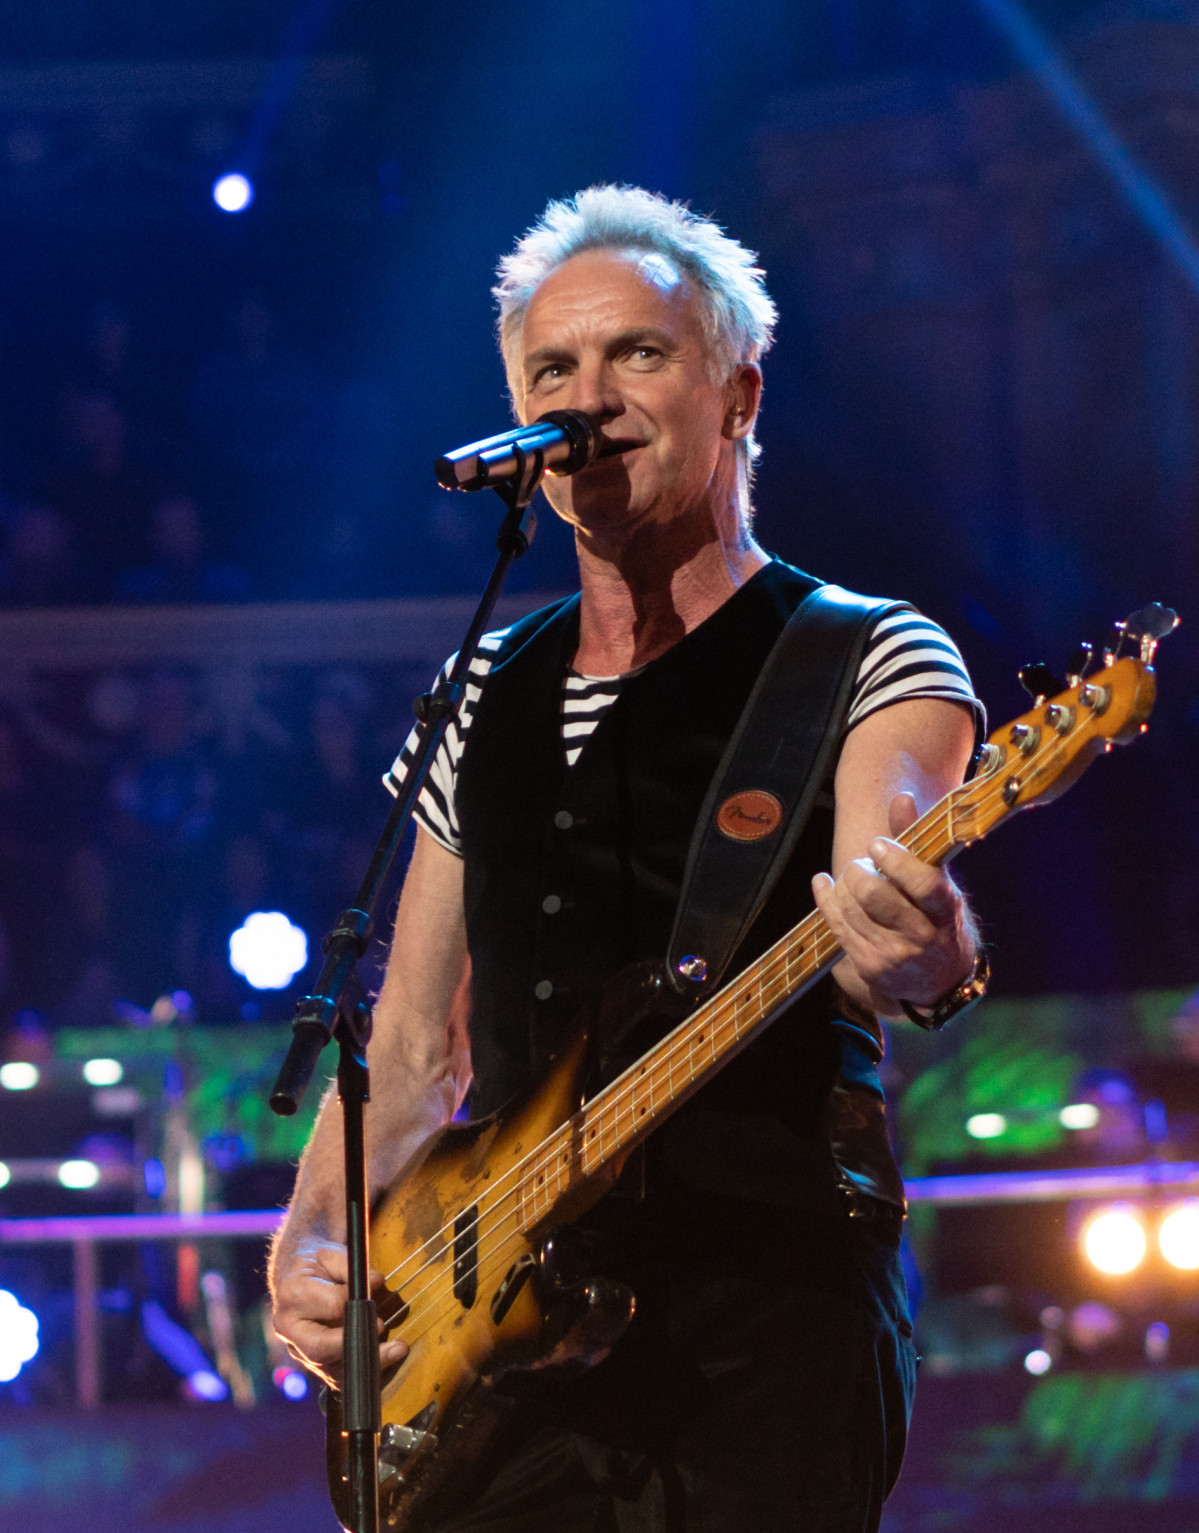 Sting in 2018 (cropped)